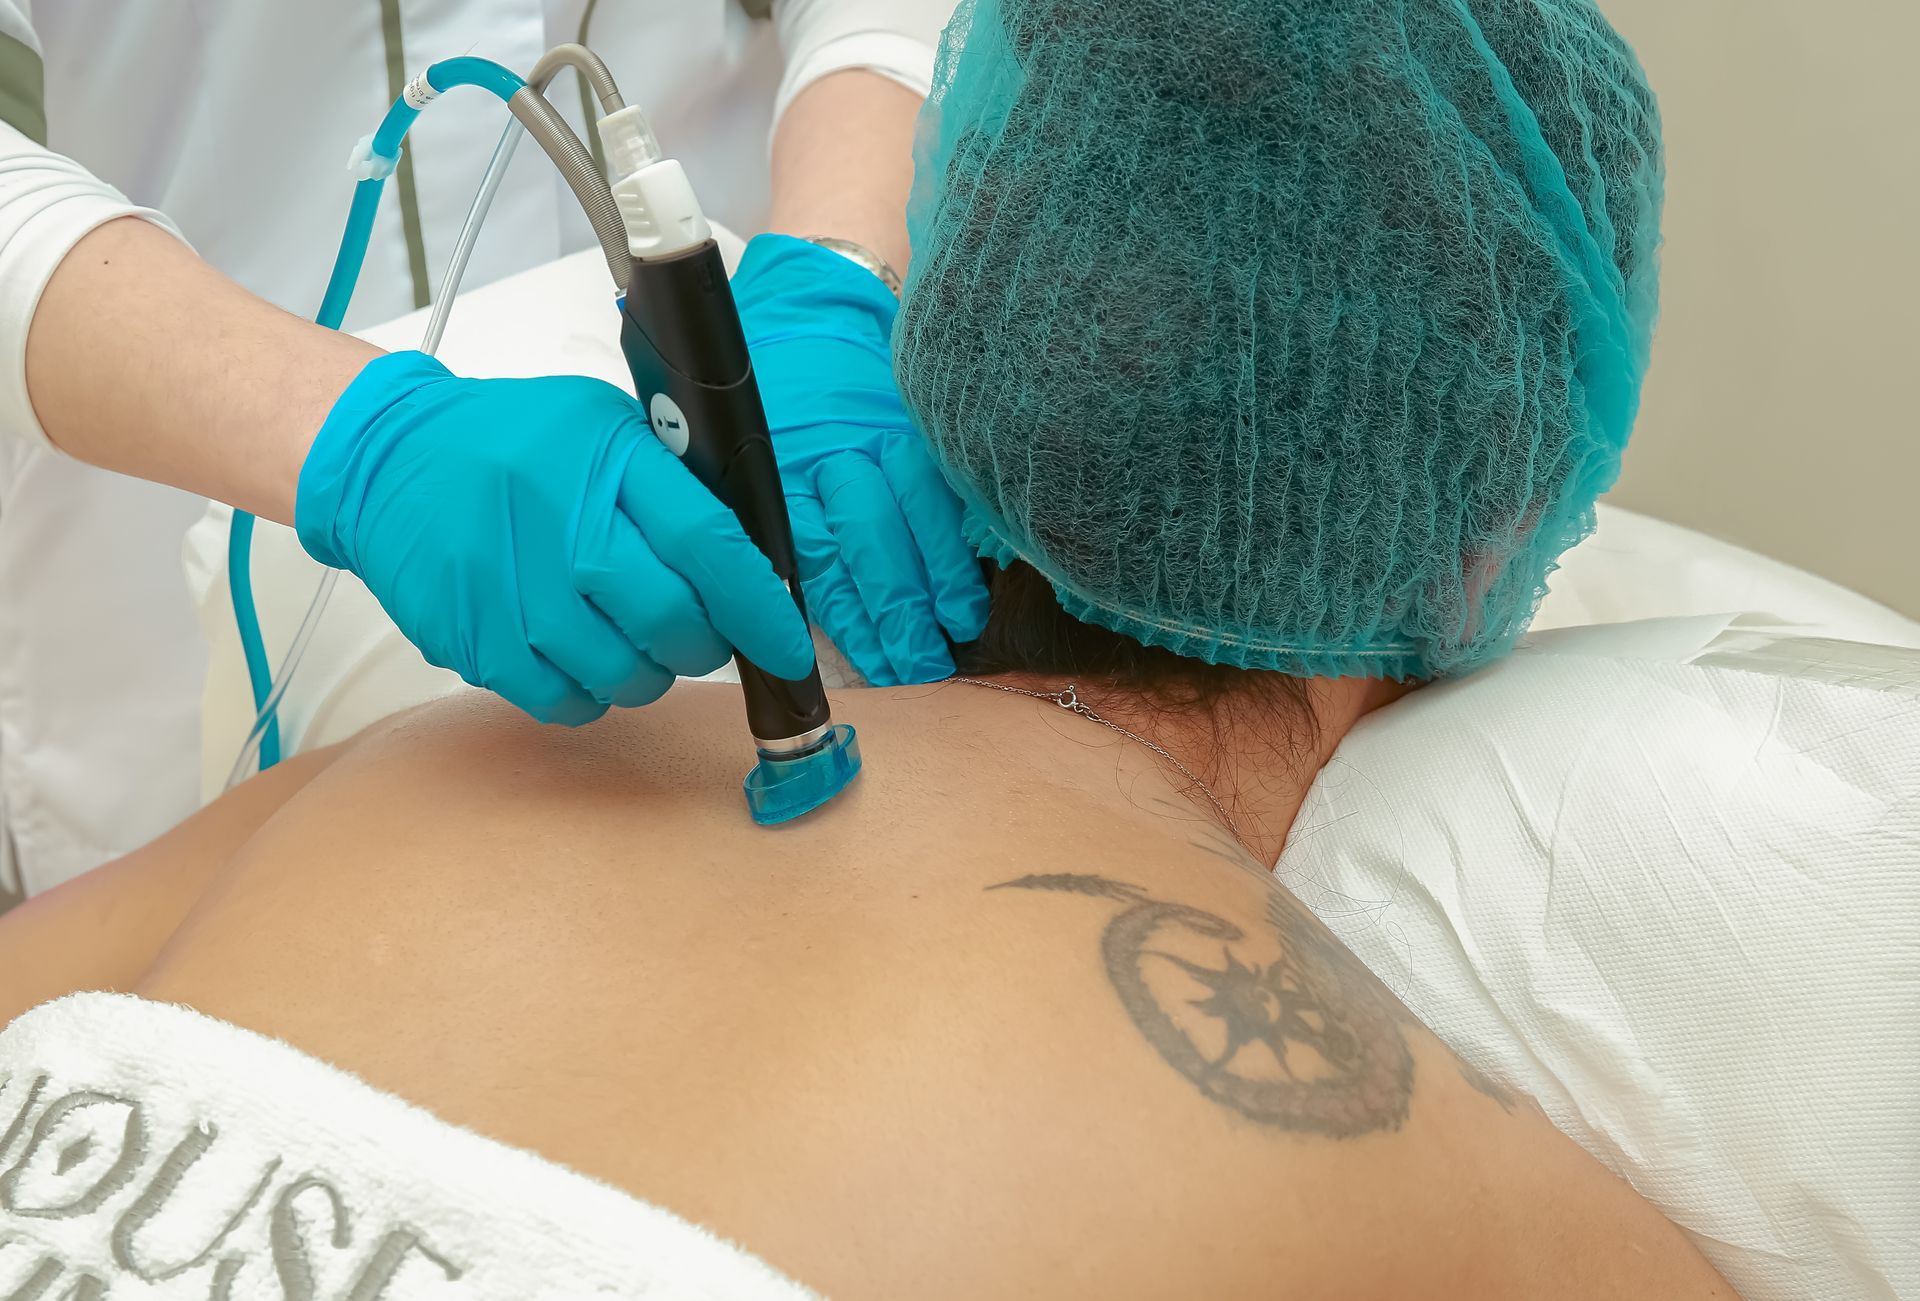 Painless medical laser being applied to patient's skin